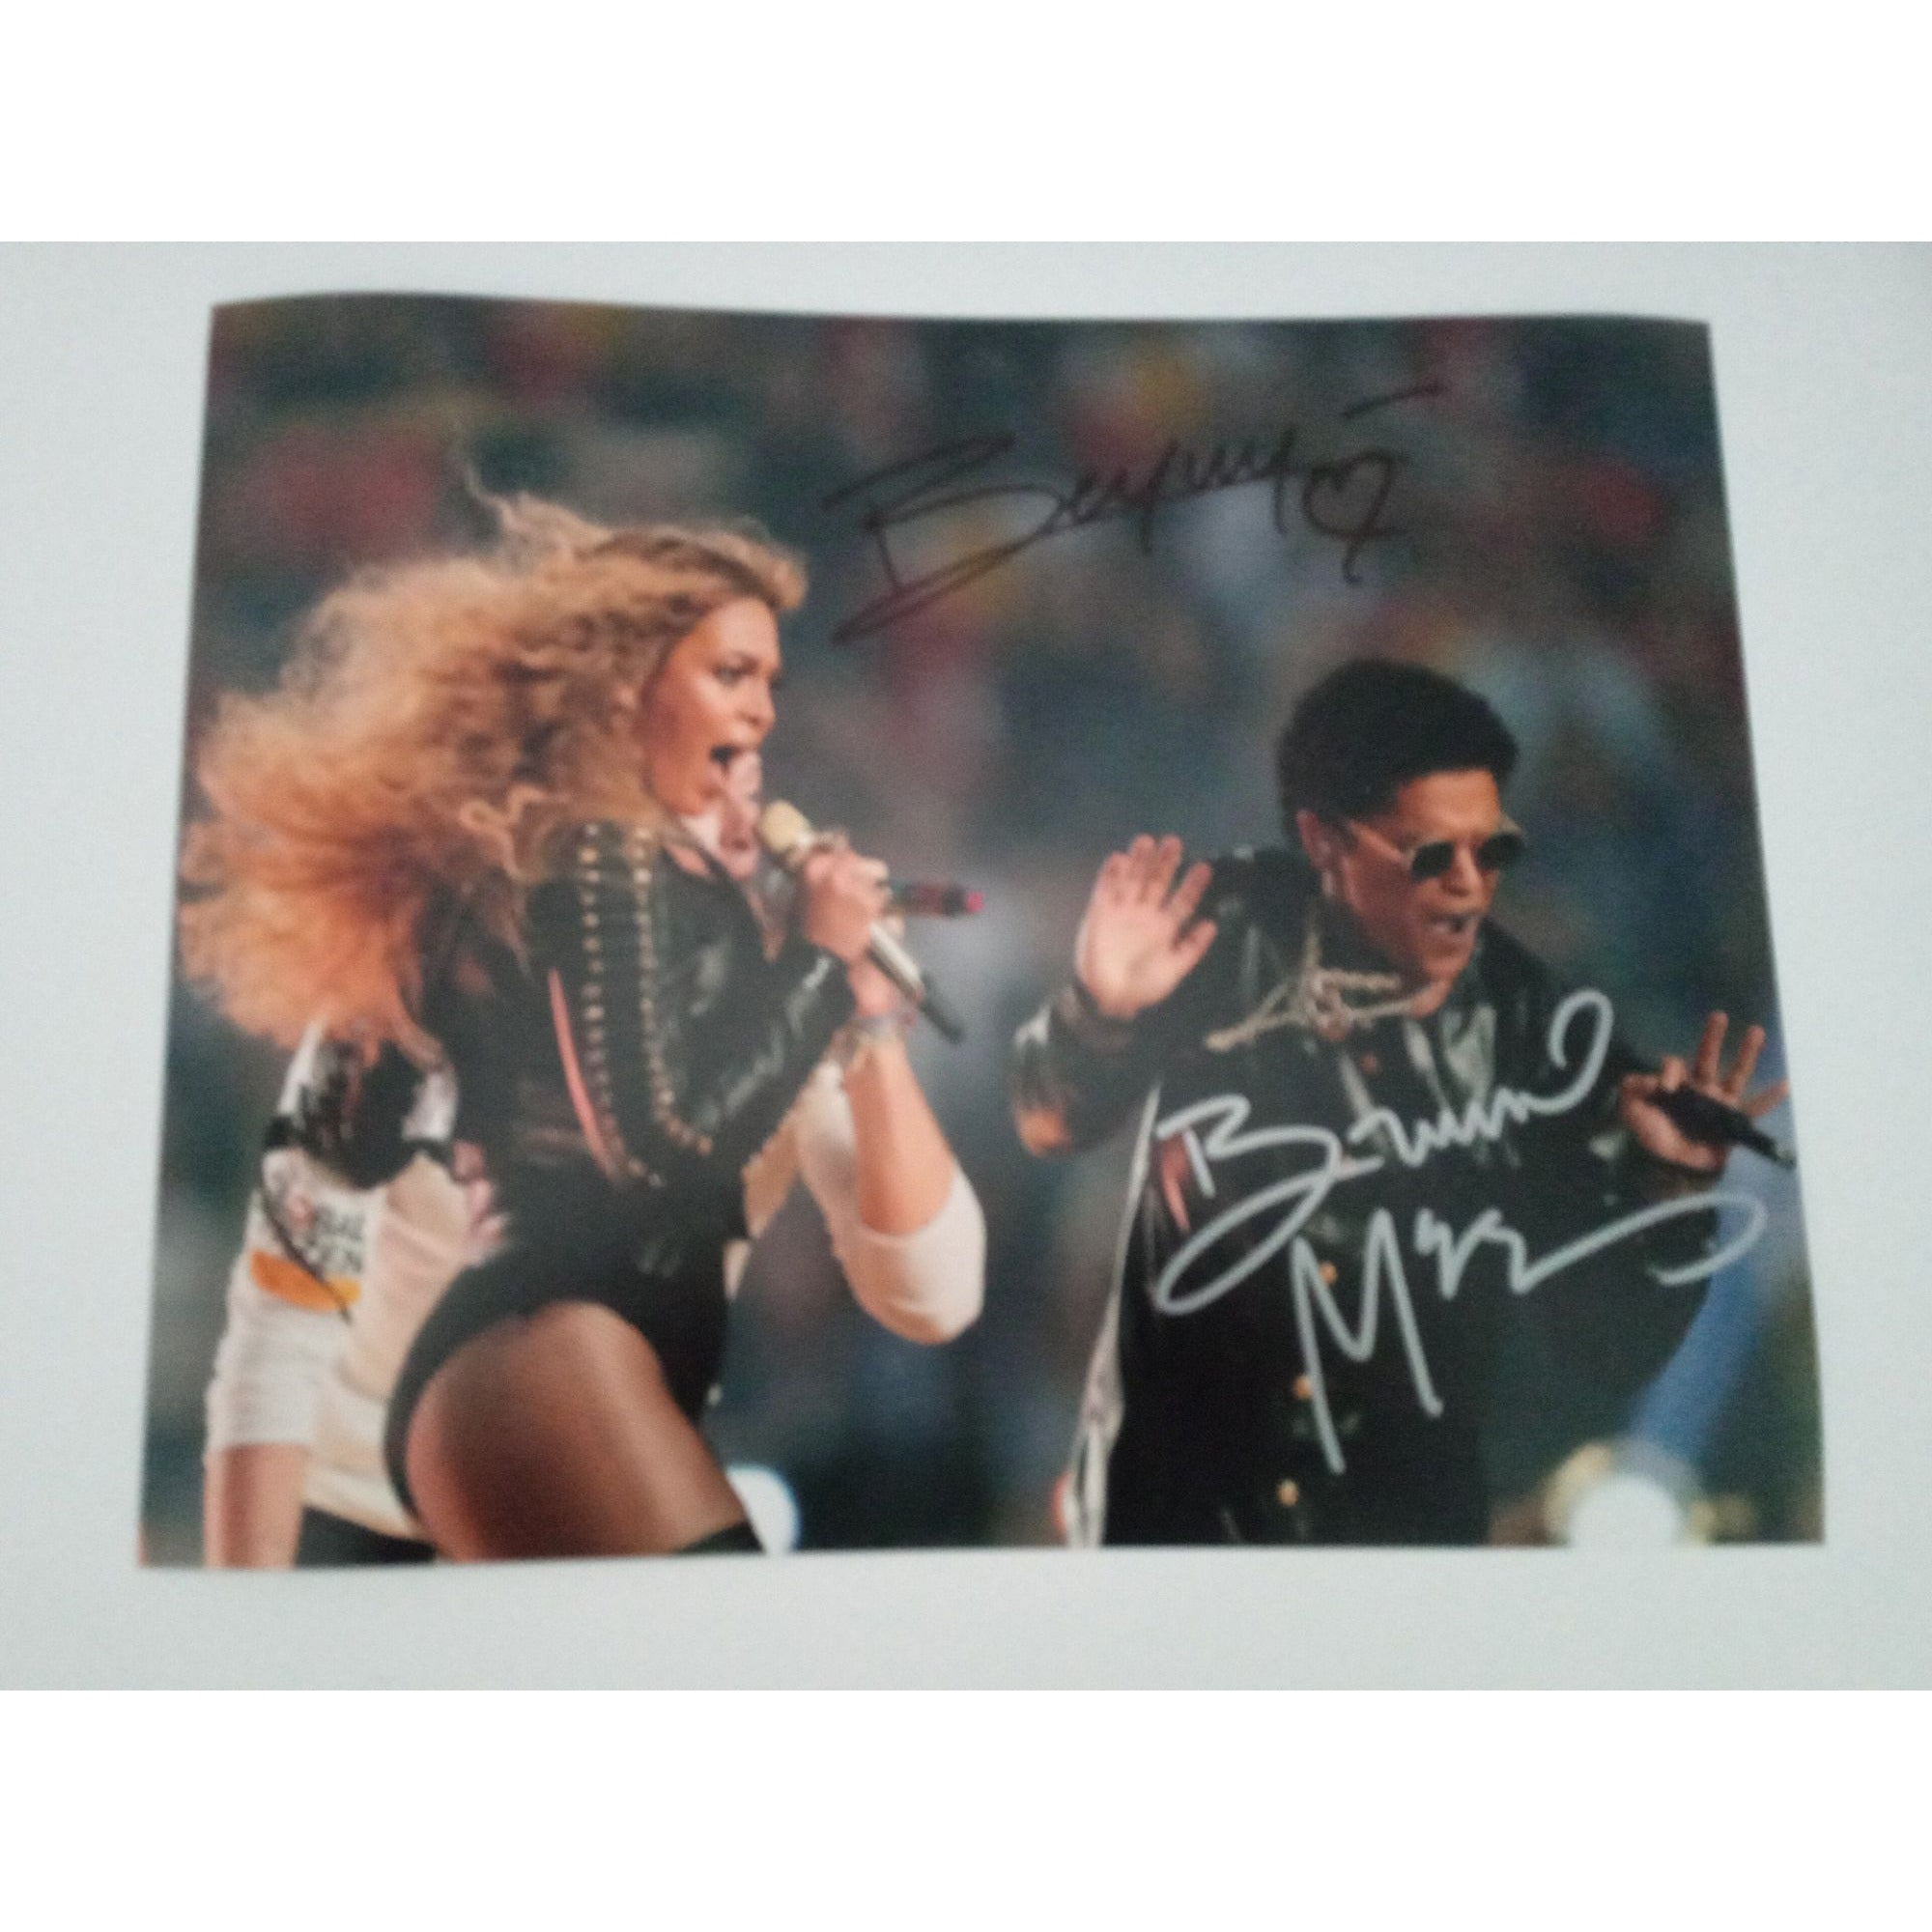 Beyonce Knowles and Bruno Mars signed 8 by 10 photo with proof